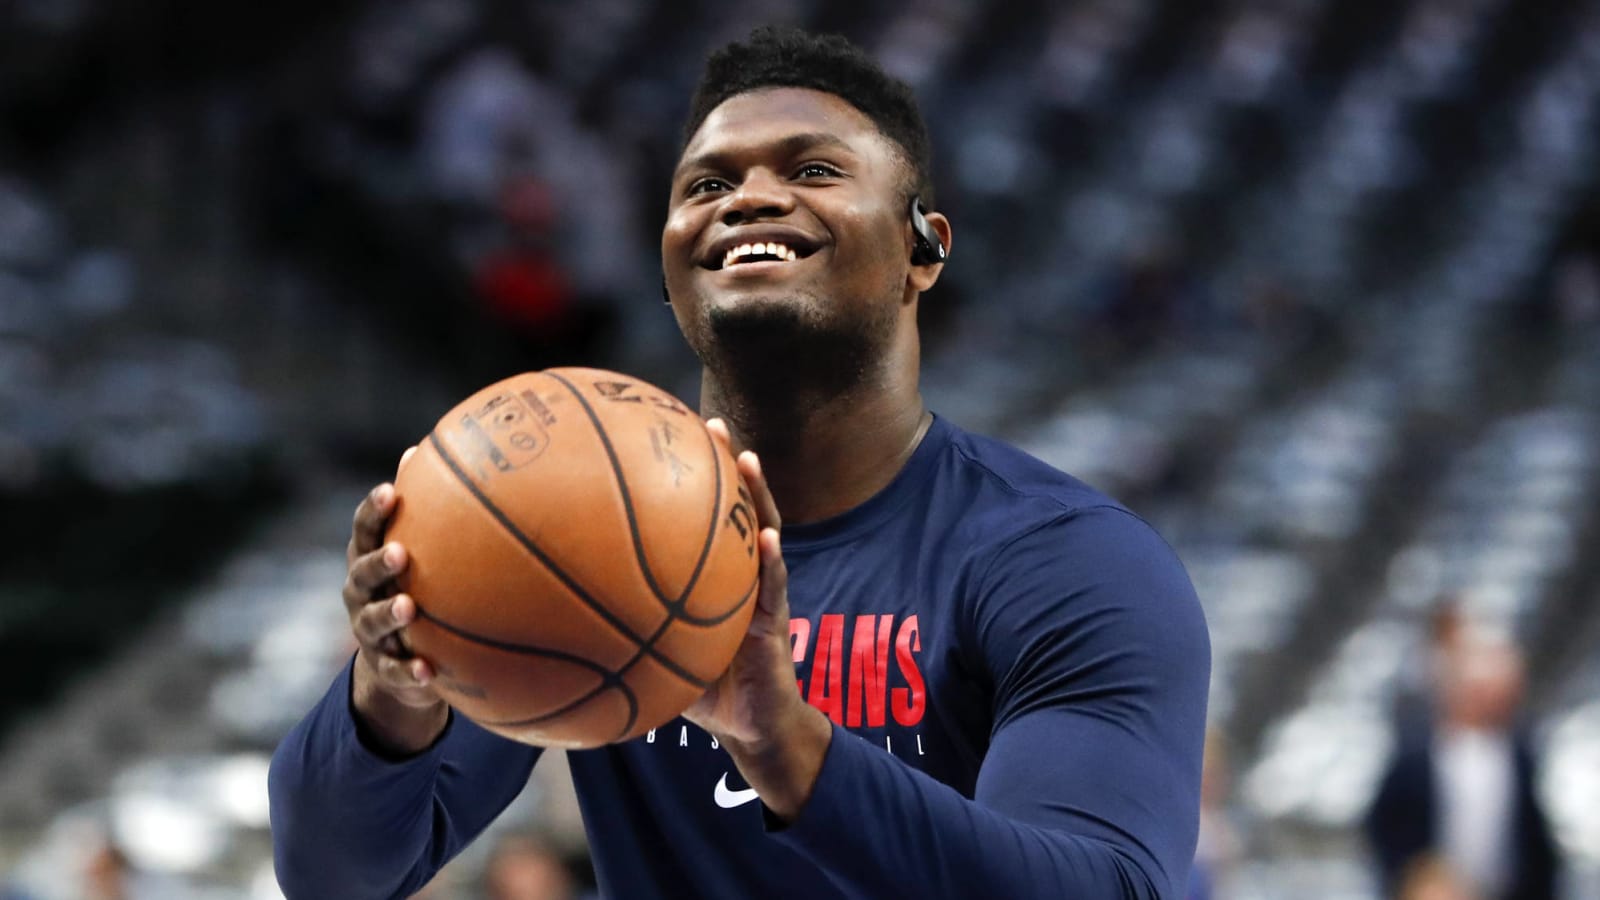 Zion Williamson on being 'NBA 2K21' cover athlete: 'It's a dream come true'